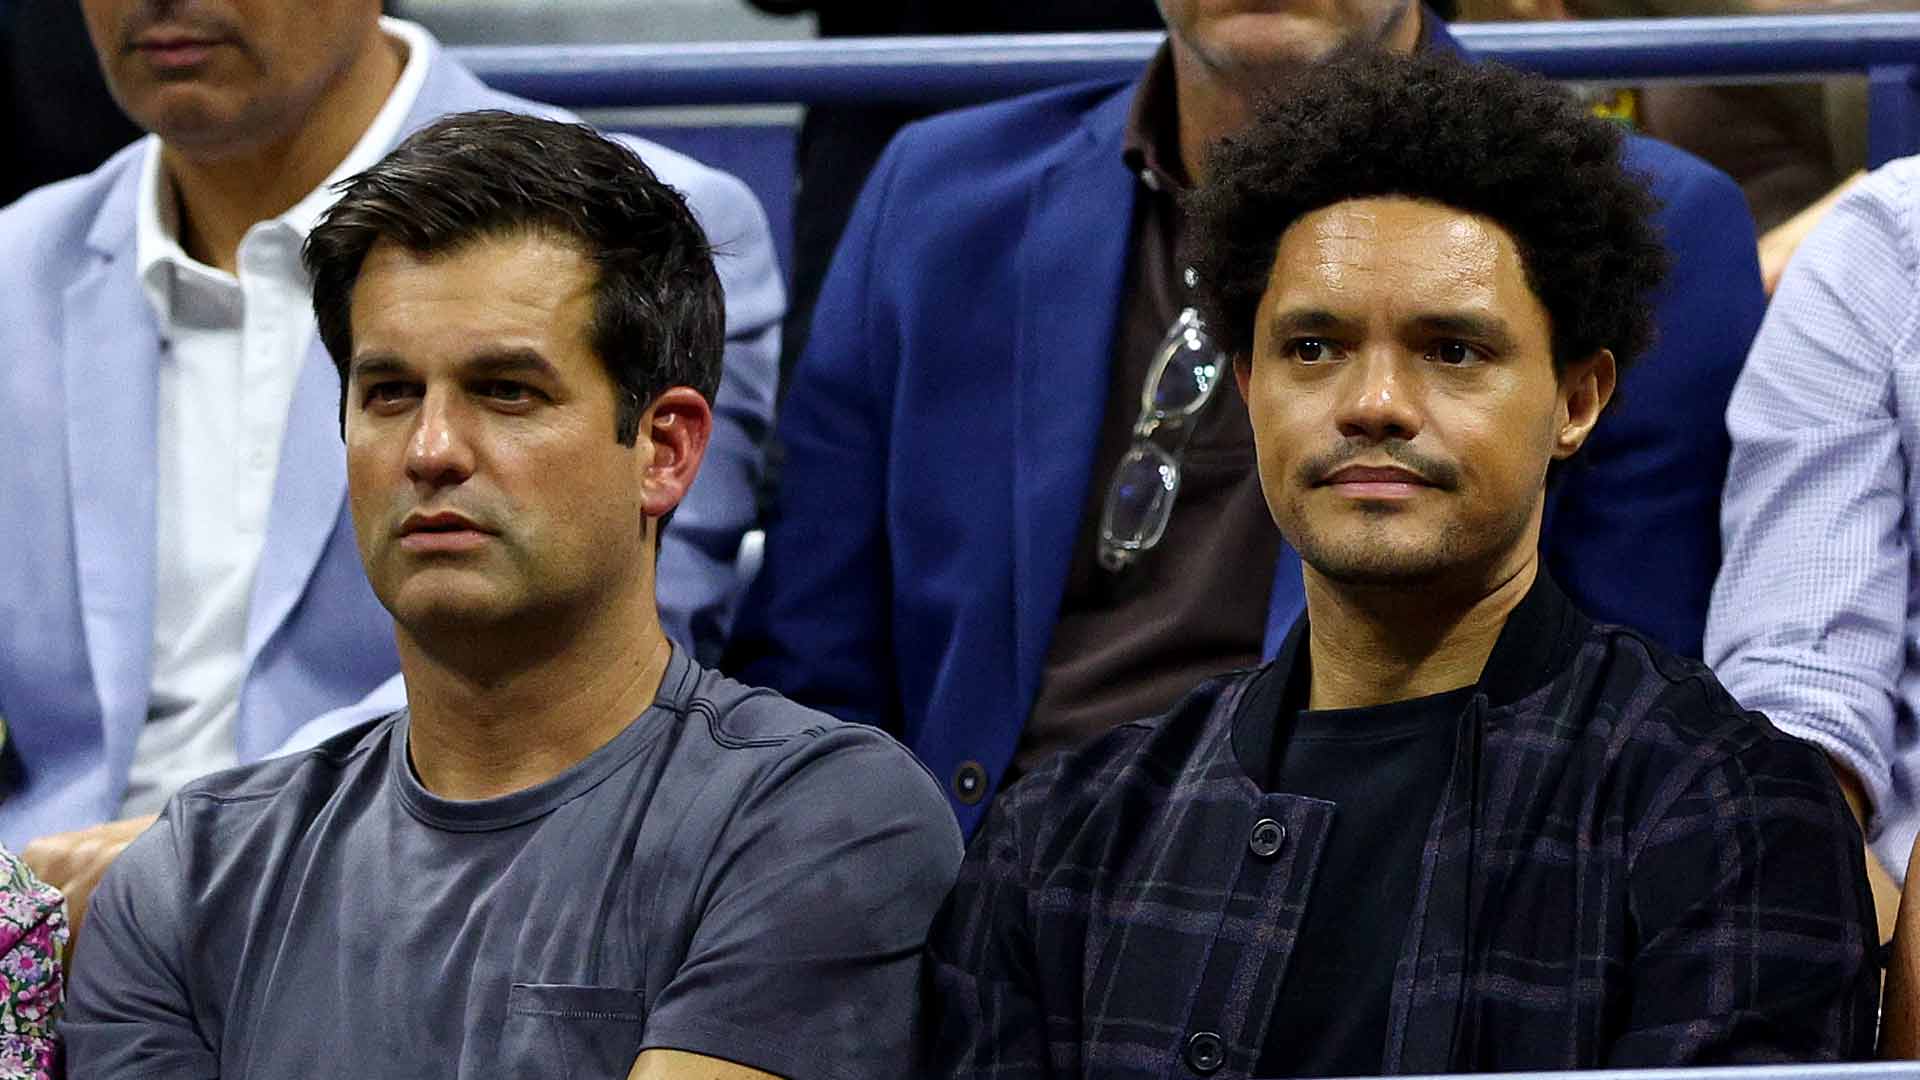 Comedian Trevor Noah (right) was in attendance for the US Open quarter-finals Tuesday night.